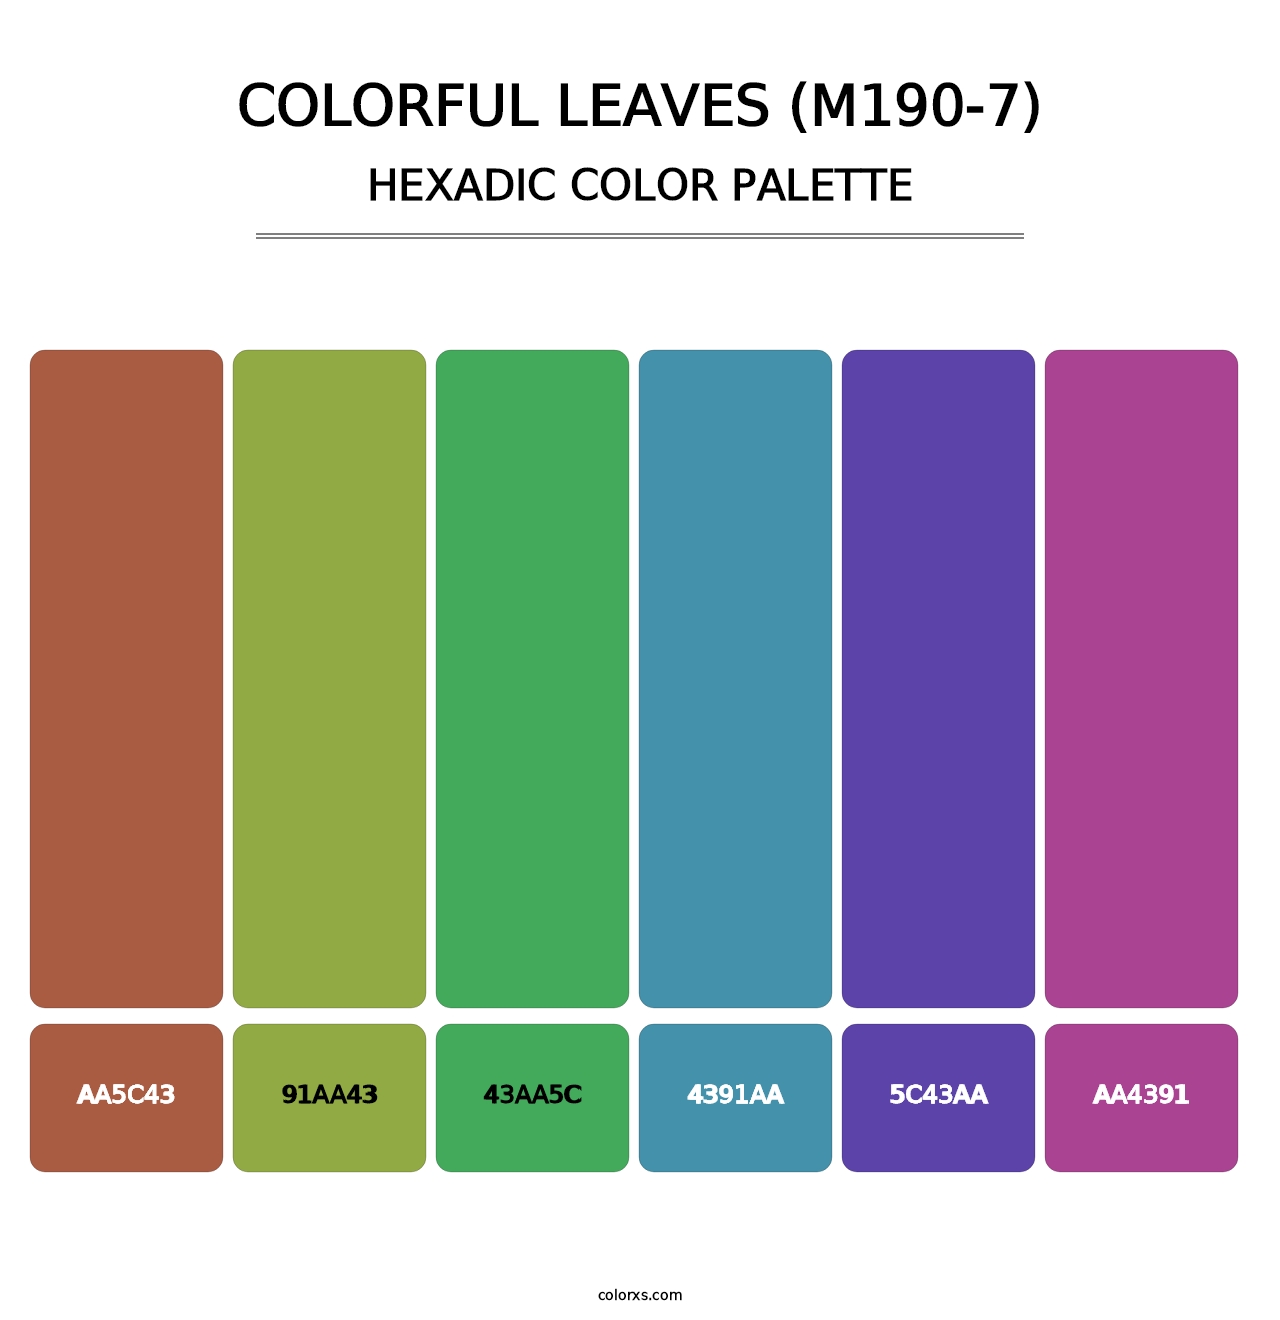 Colorful Leaves (M190-7) - Hexadic Color Palette